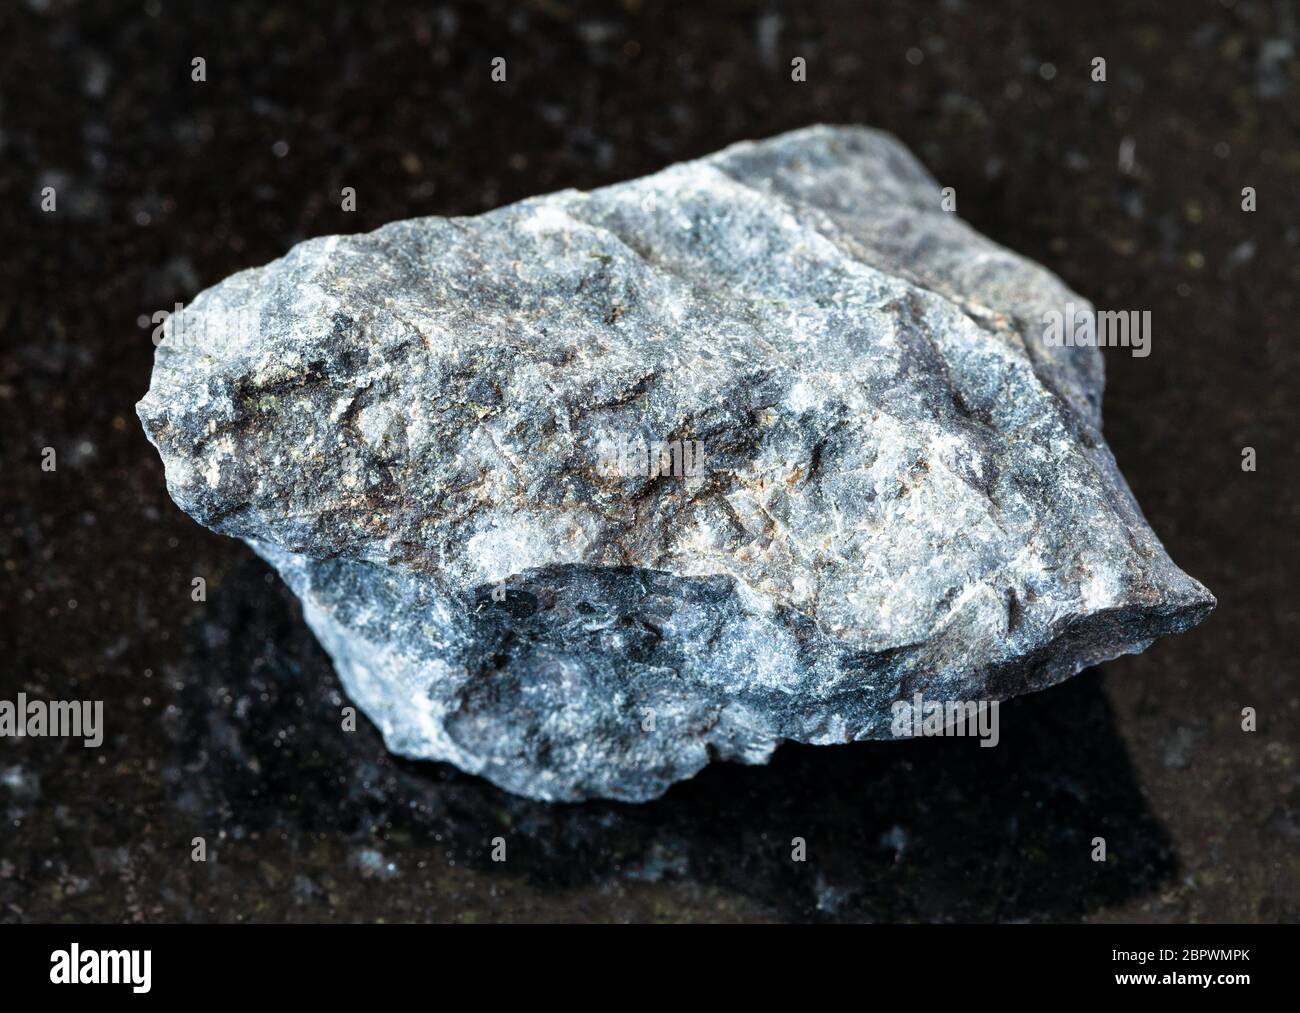 closeup of sample of natural mineral from geological collection - unpolished gray Basalt rock on black granite background Stock Photo